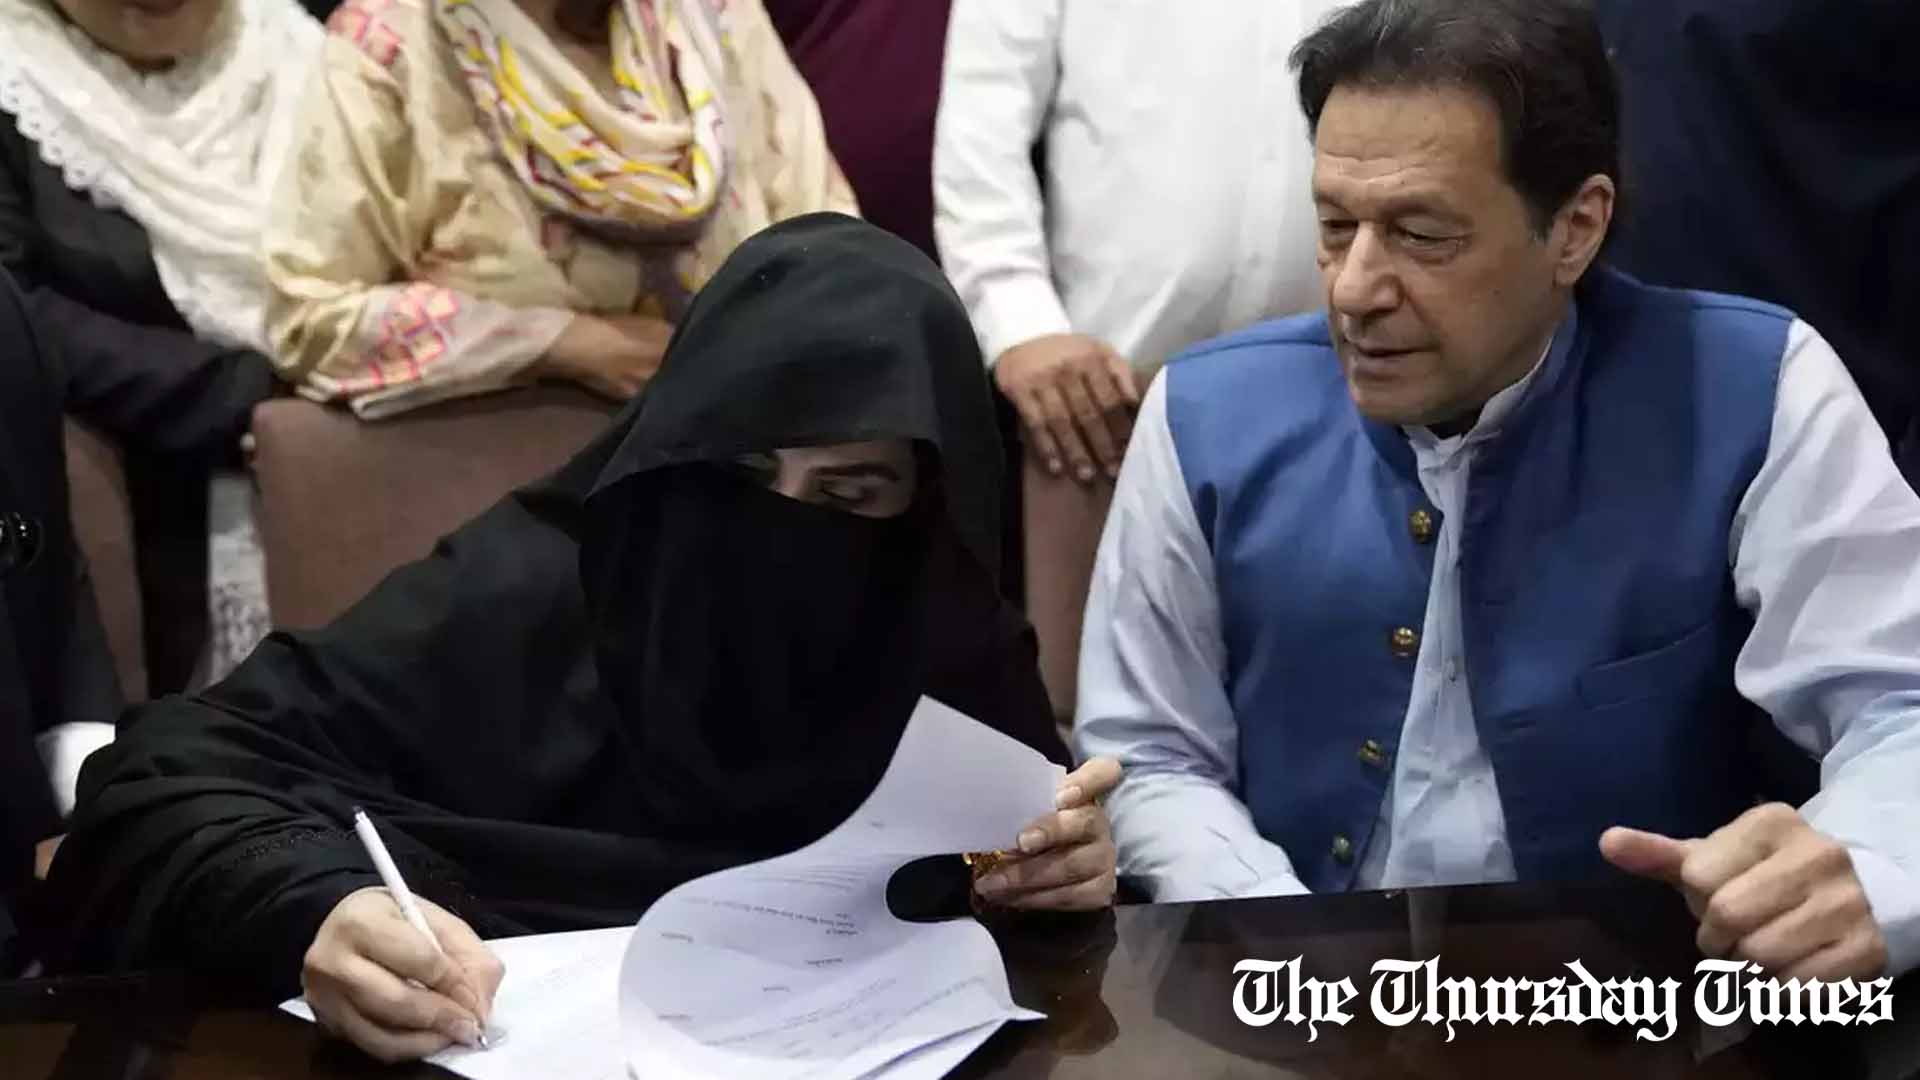 A file photo is shown of former prime minister Imran Khan (R) and former Pakistani first lady Bushra Bibi (L). — FILE/THE THURSDAY TIMES